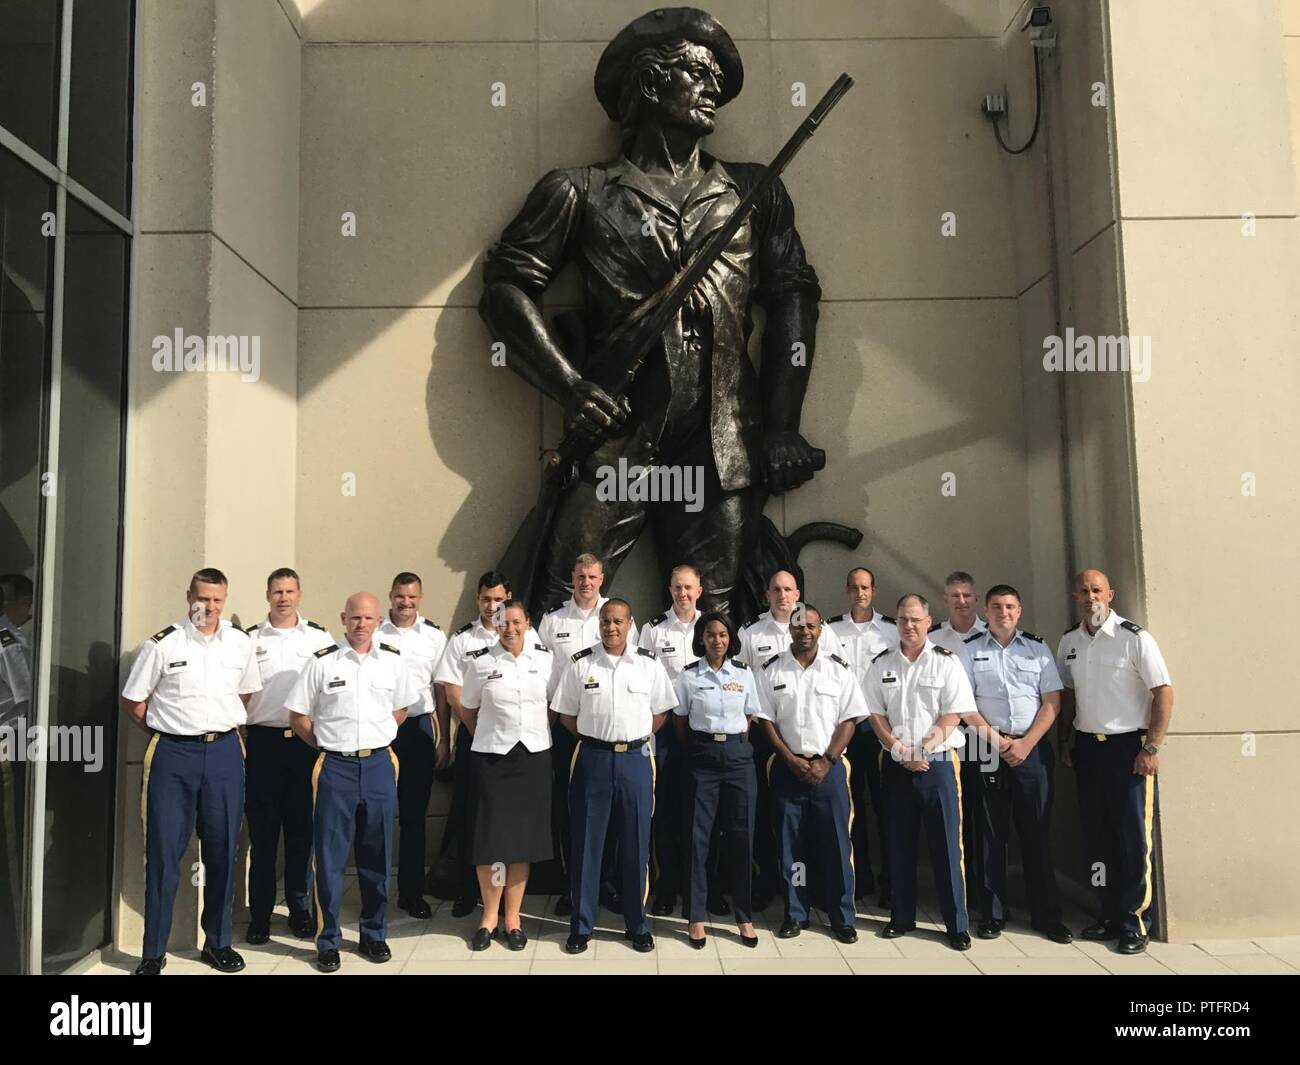 North Carolina National Guard Soldiers and Airmen participating in Operation Potomac stand in front of a minuteman statue at the Army National Guard Readiness Center in Washington, D.C. on July 11, 2017. Operation Potomac provides an opportunity for mid-career officers and warrant officers to gain insight into the strategic level budgeting and policy implementation by traveling to Washington and meeting with members of congress and National Guard Bureau leadership. Stock Photo